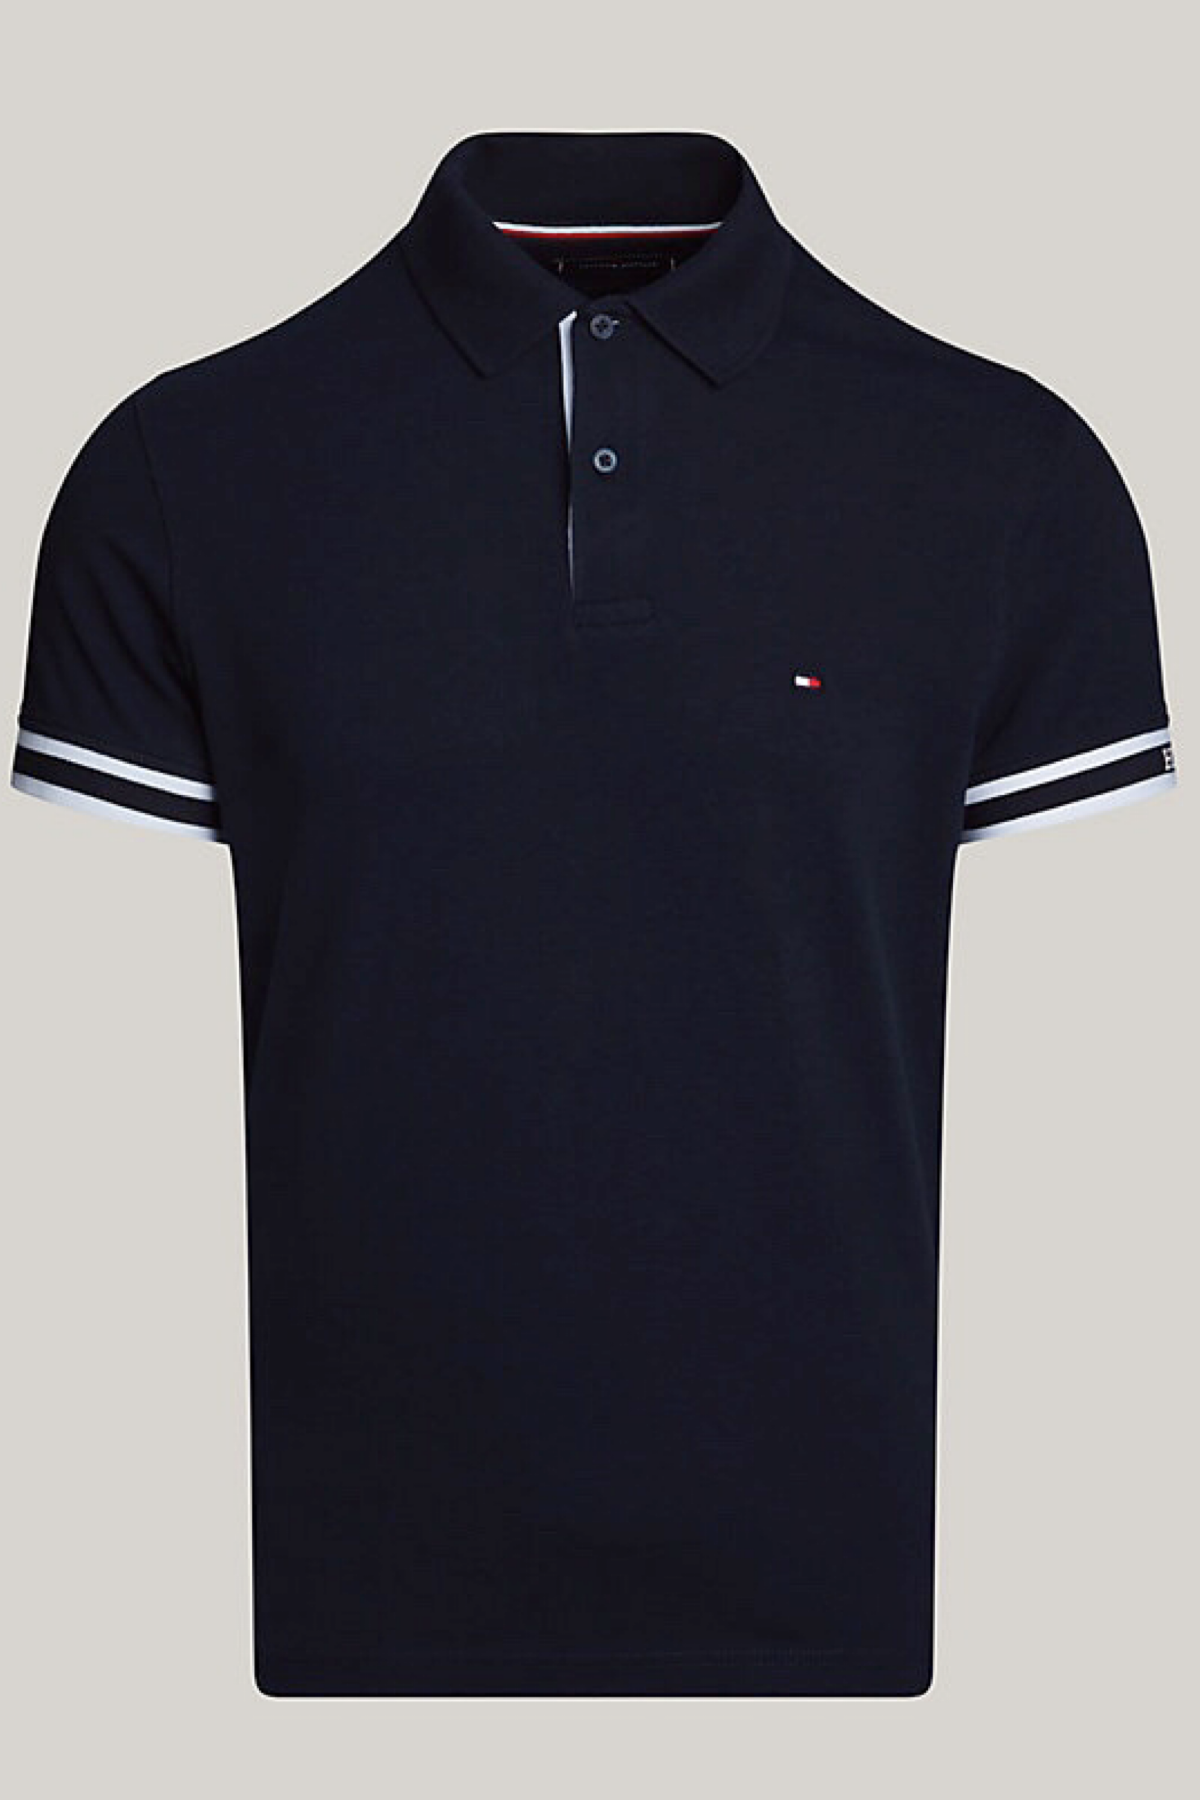 Tommy hilfiger polo monotype slim fit desert 34737